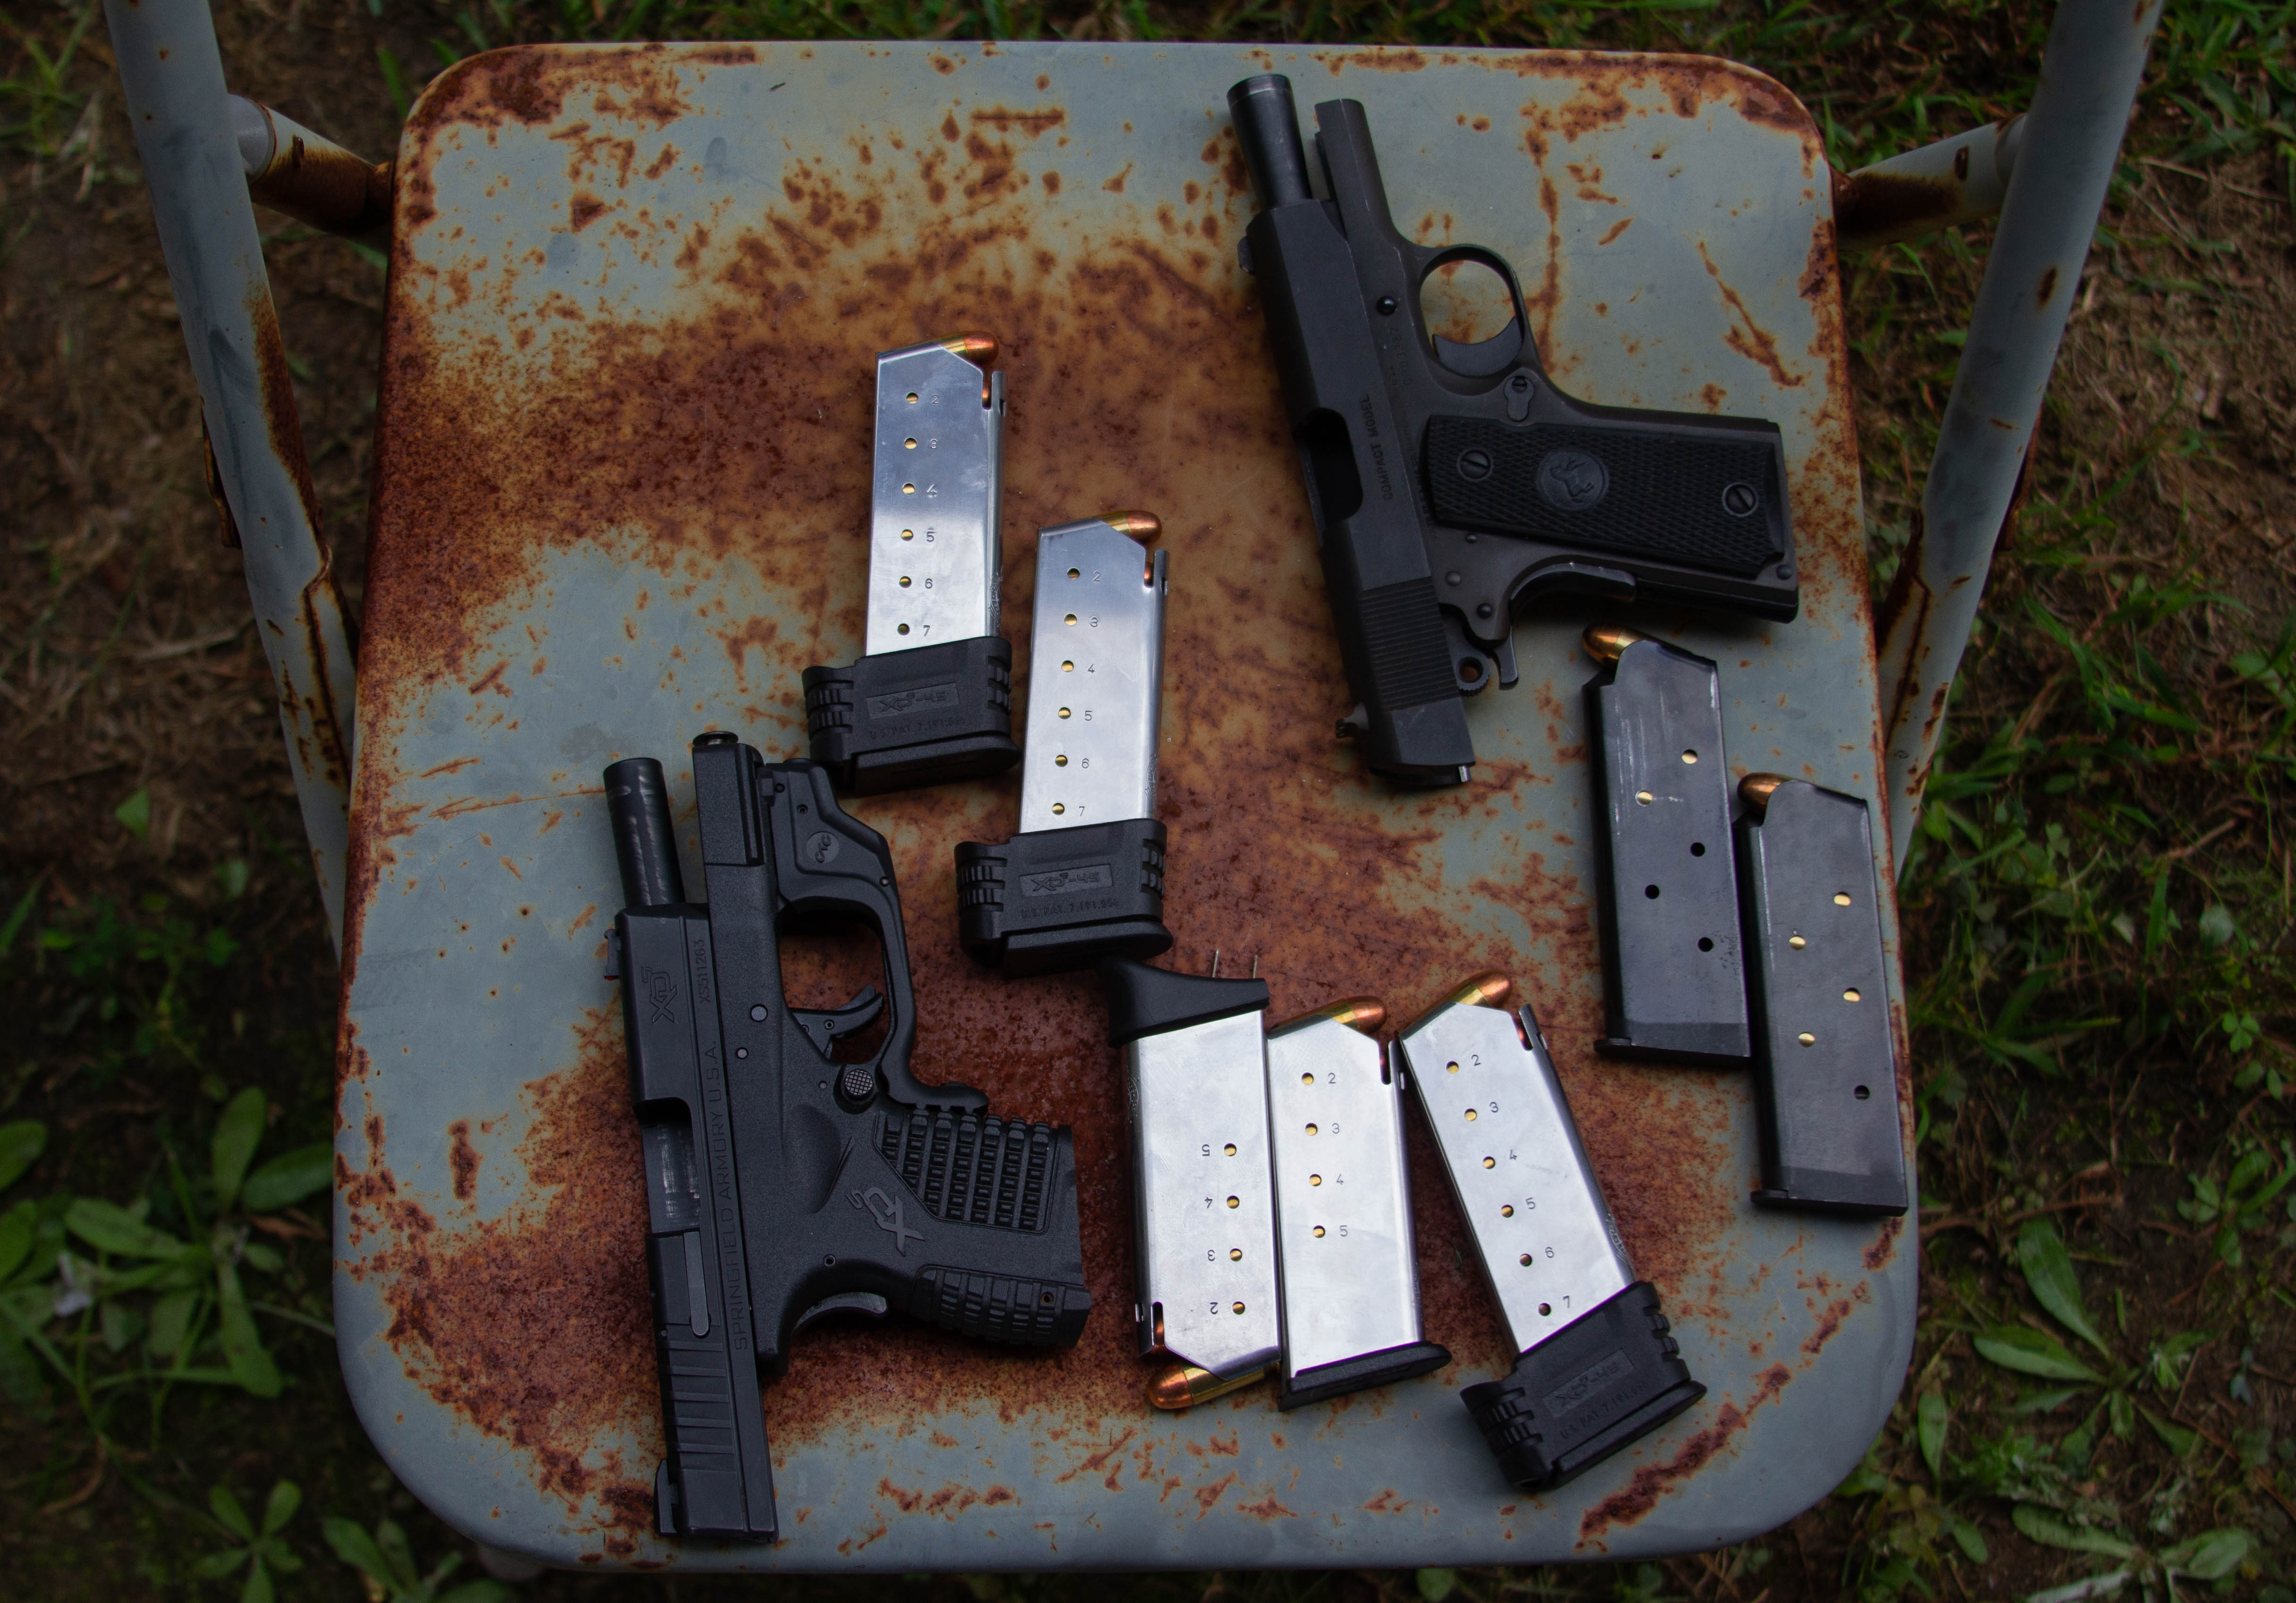 Examples of some of the concealable semi-automatic handguns that concealed carry permit holders own.